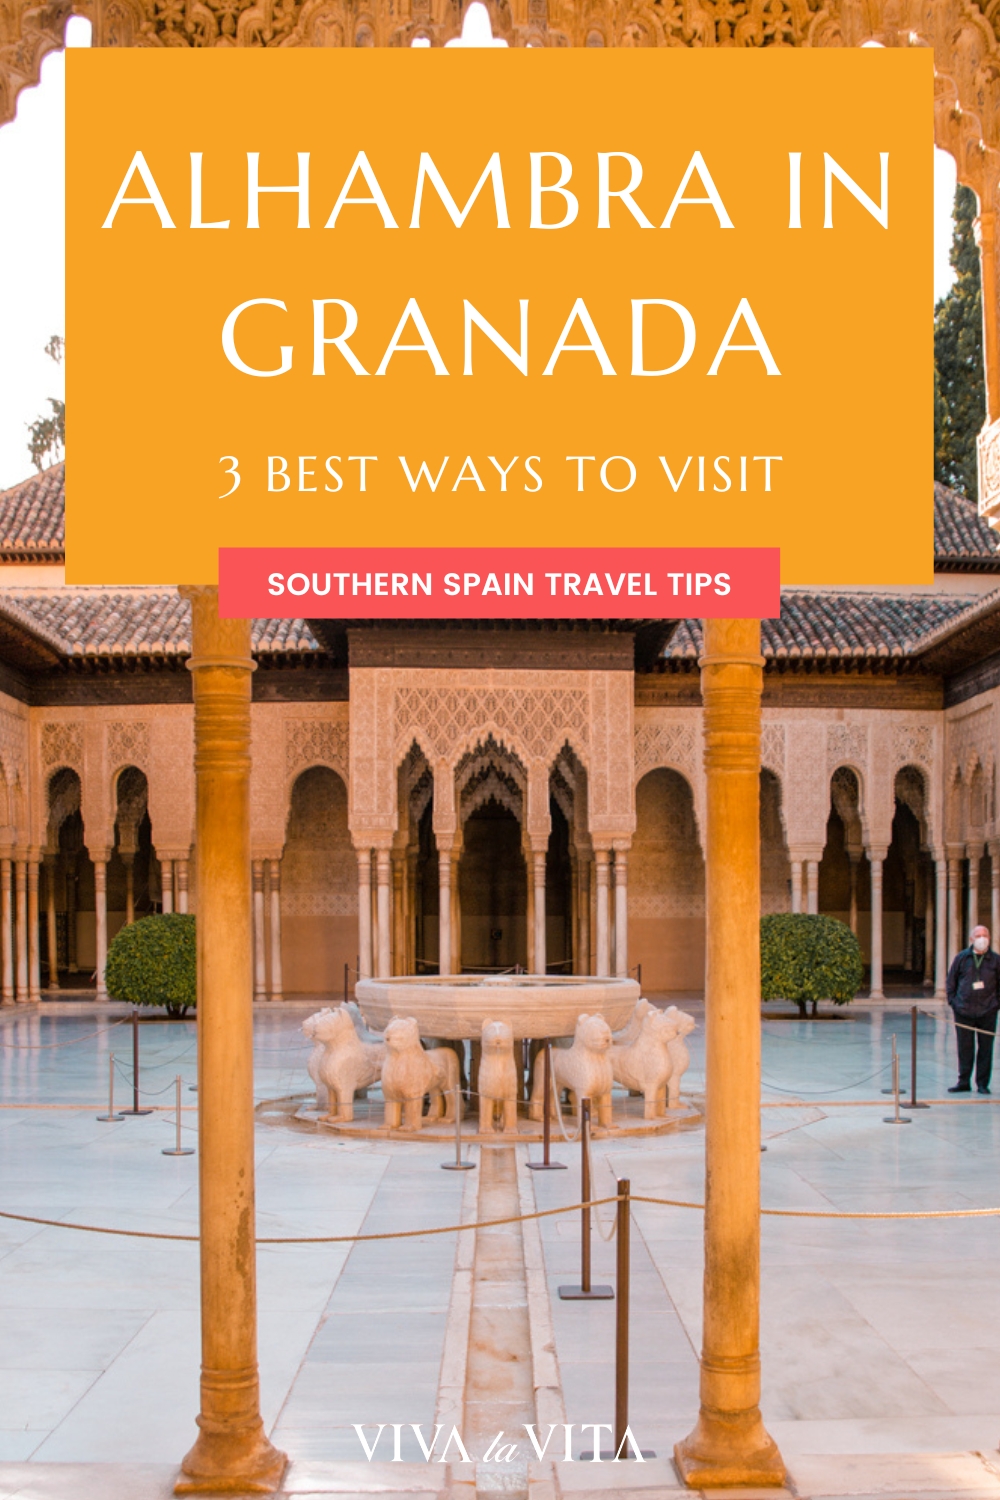 Pinterest image showing the court of the lions in Alhambra, Granada, with a headline that reads: Alhambra in Granada 3 best ways to visit, Southern Spain travel tips